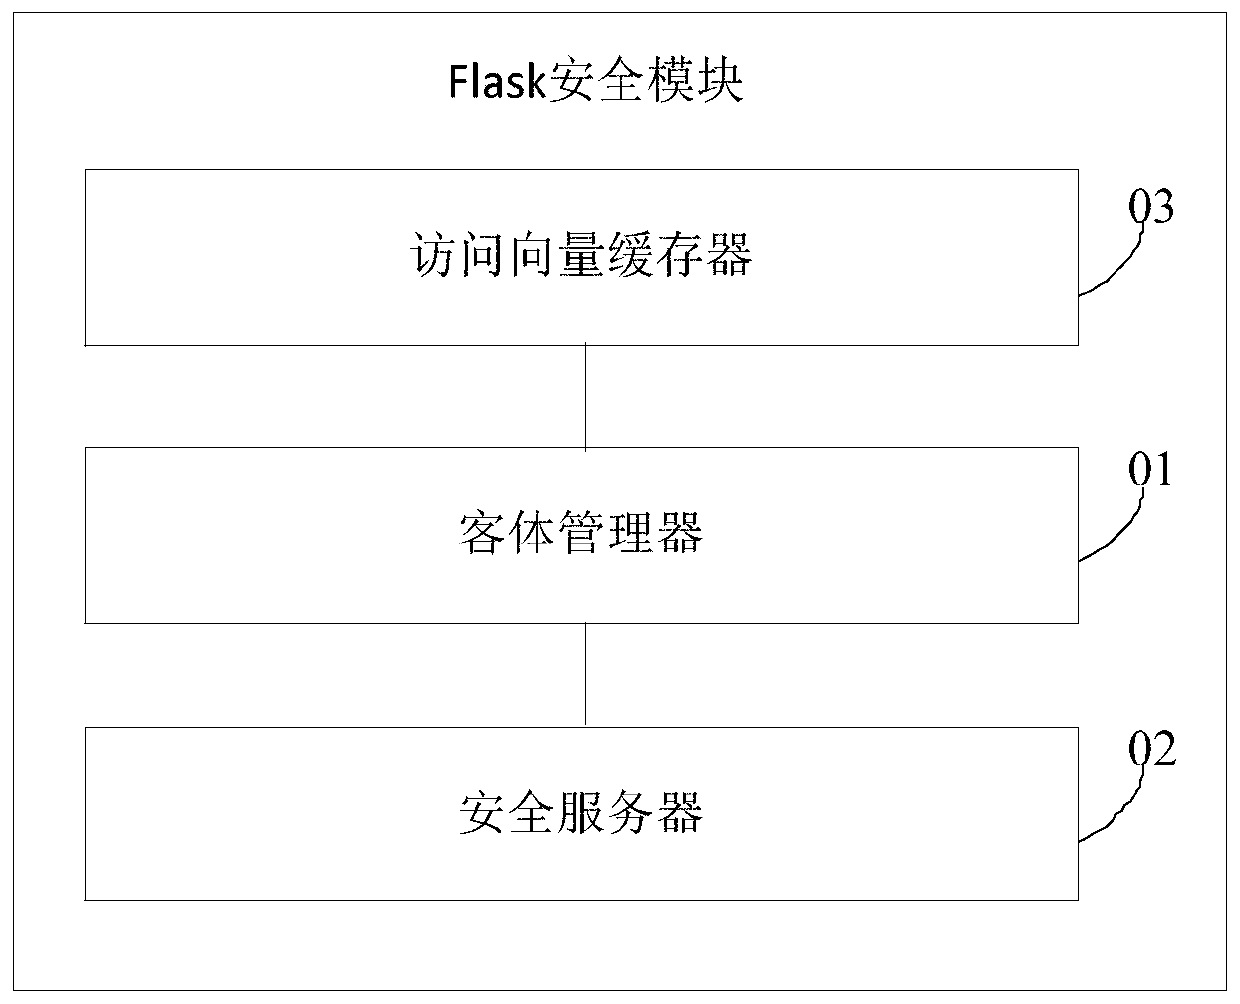 How to build the flask security module